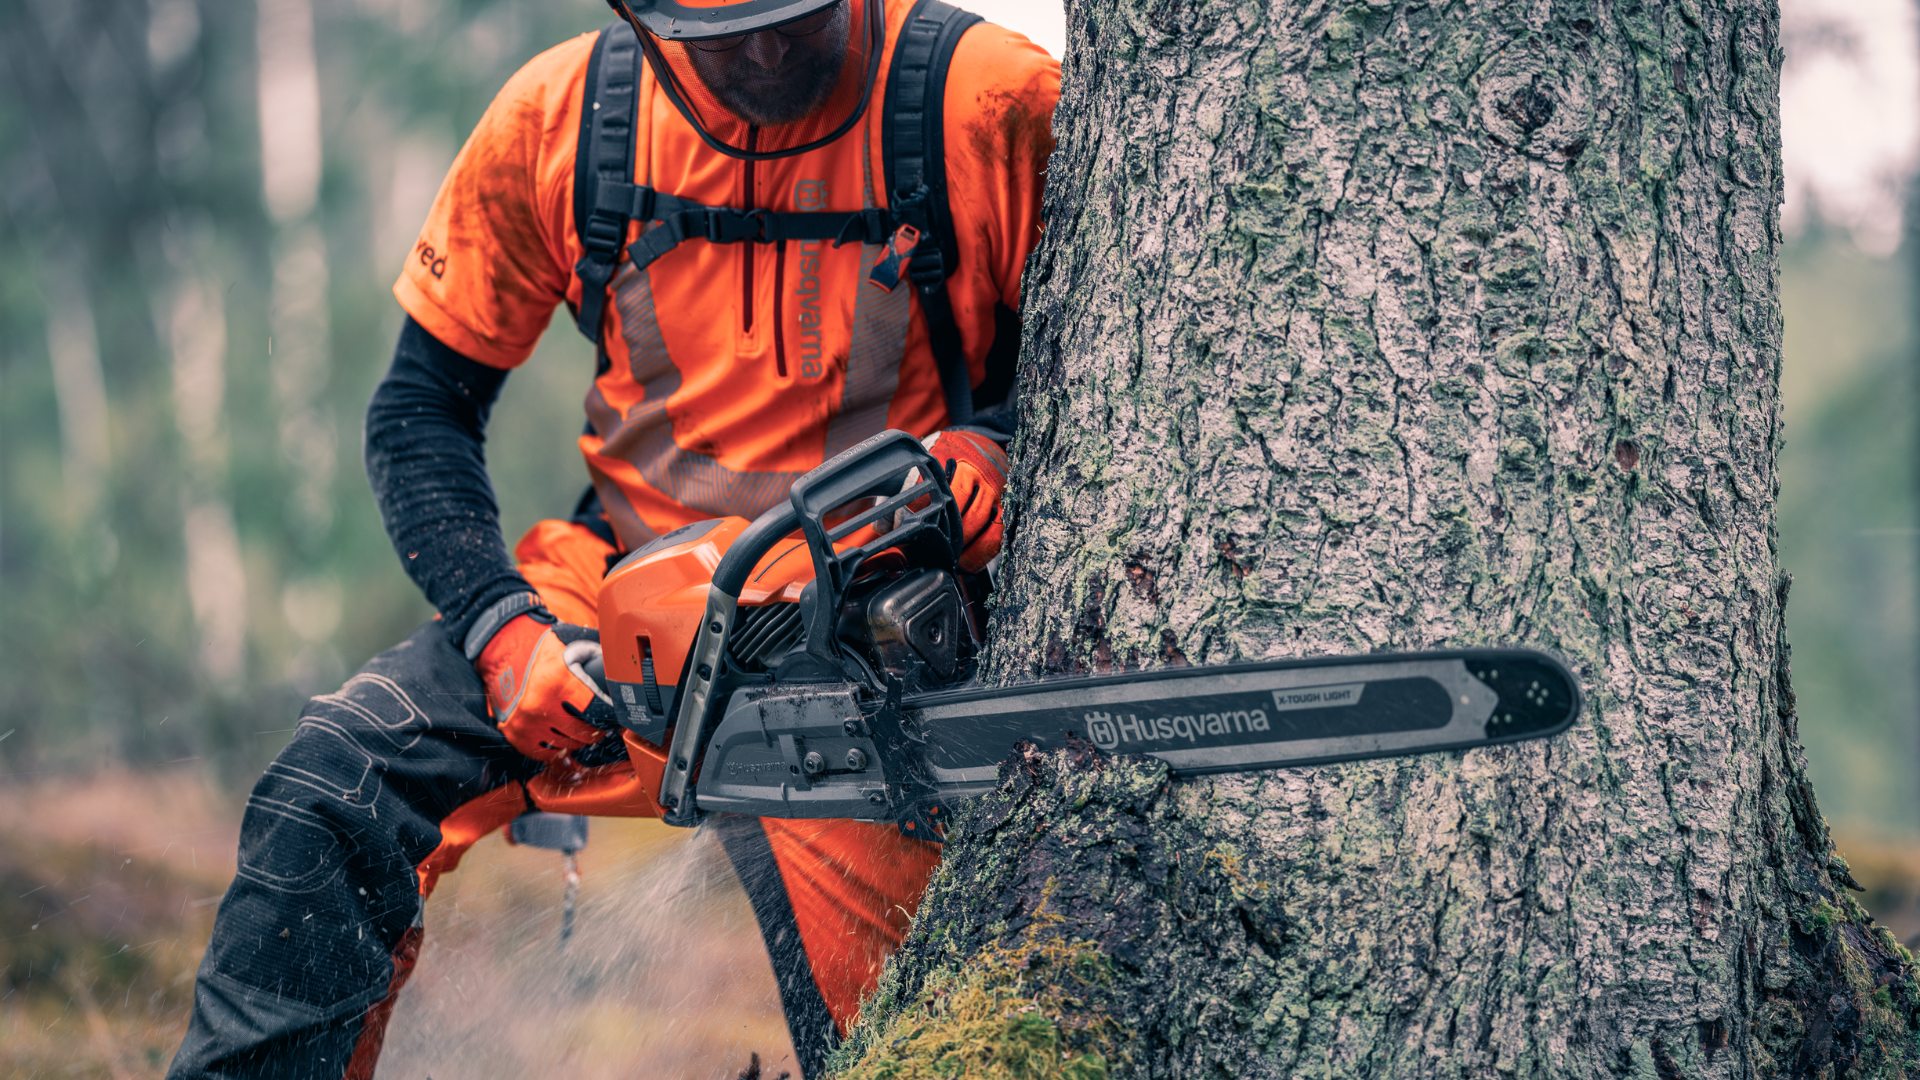 professional with chainsaw chopping tree trunk